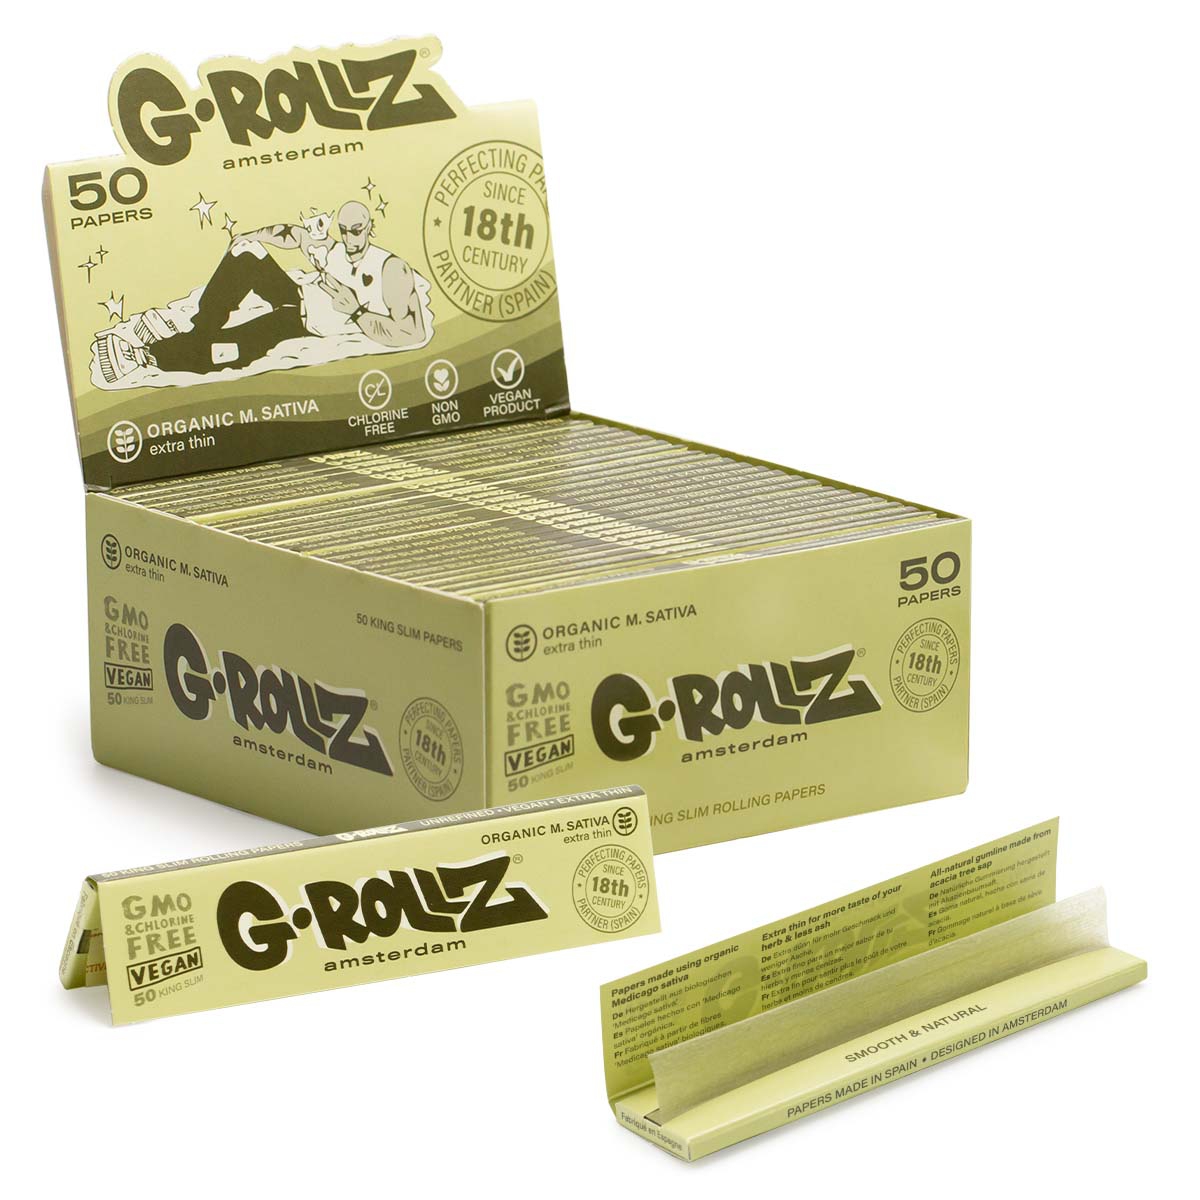 G-Rollz, Collector 'Colossal Dream' Pink - 50 KS Slim Papers + Tips (24  Booklets Display), Rolling Papers, G-ROLLZ